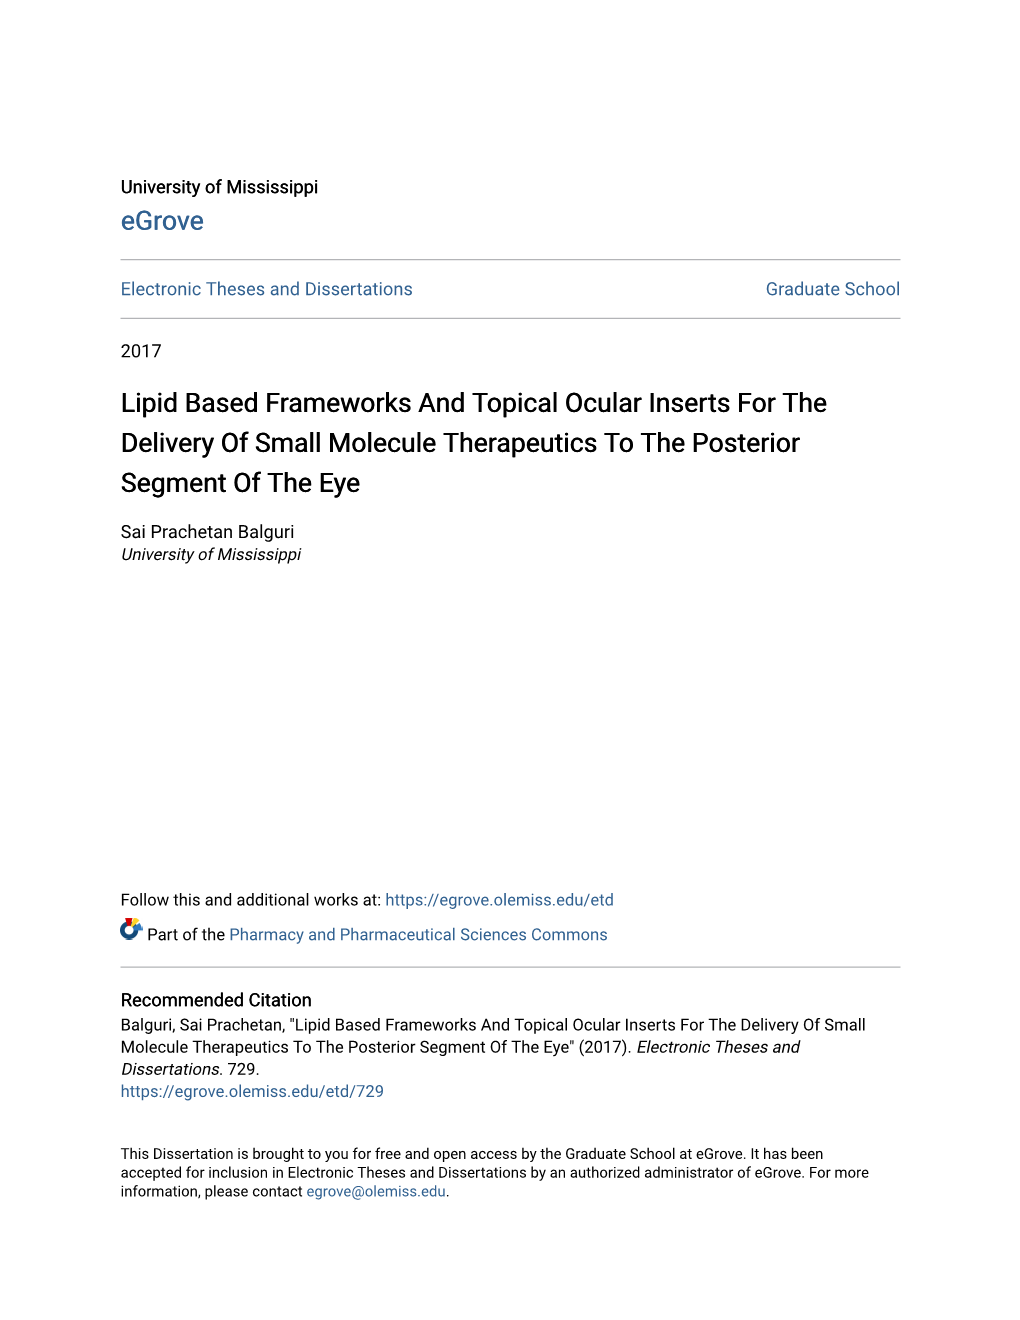 Lipid Based Frameworks and Topical Ocular Inserts for the Delivery of Small Molecule Therapeutics to the Posterior Segment of the Eye